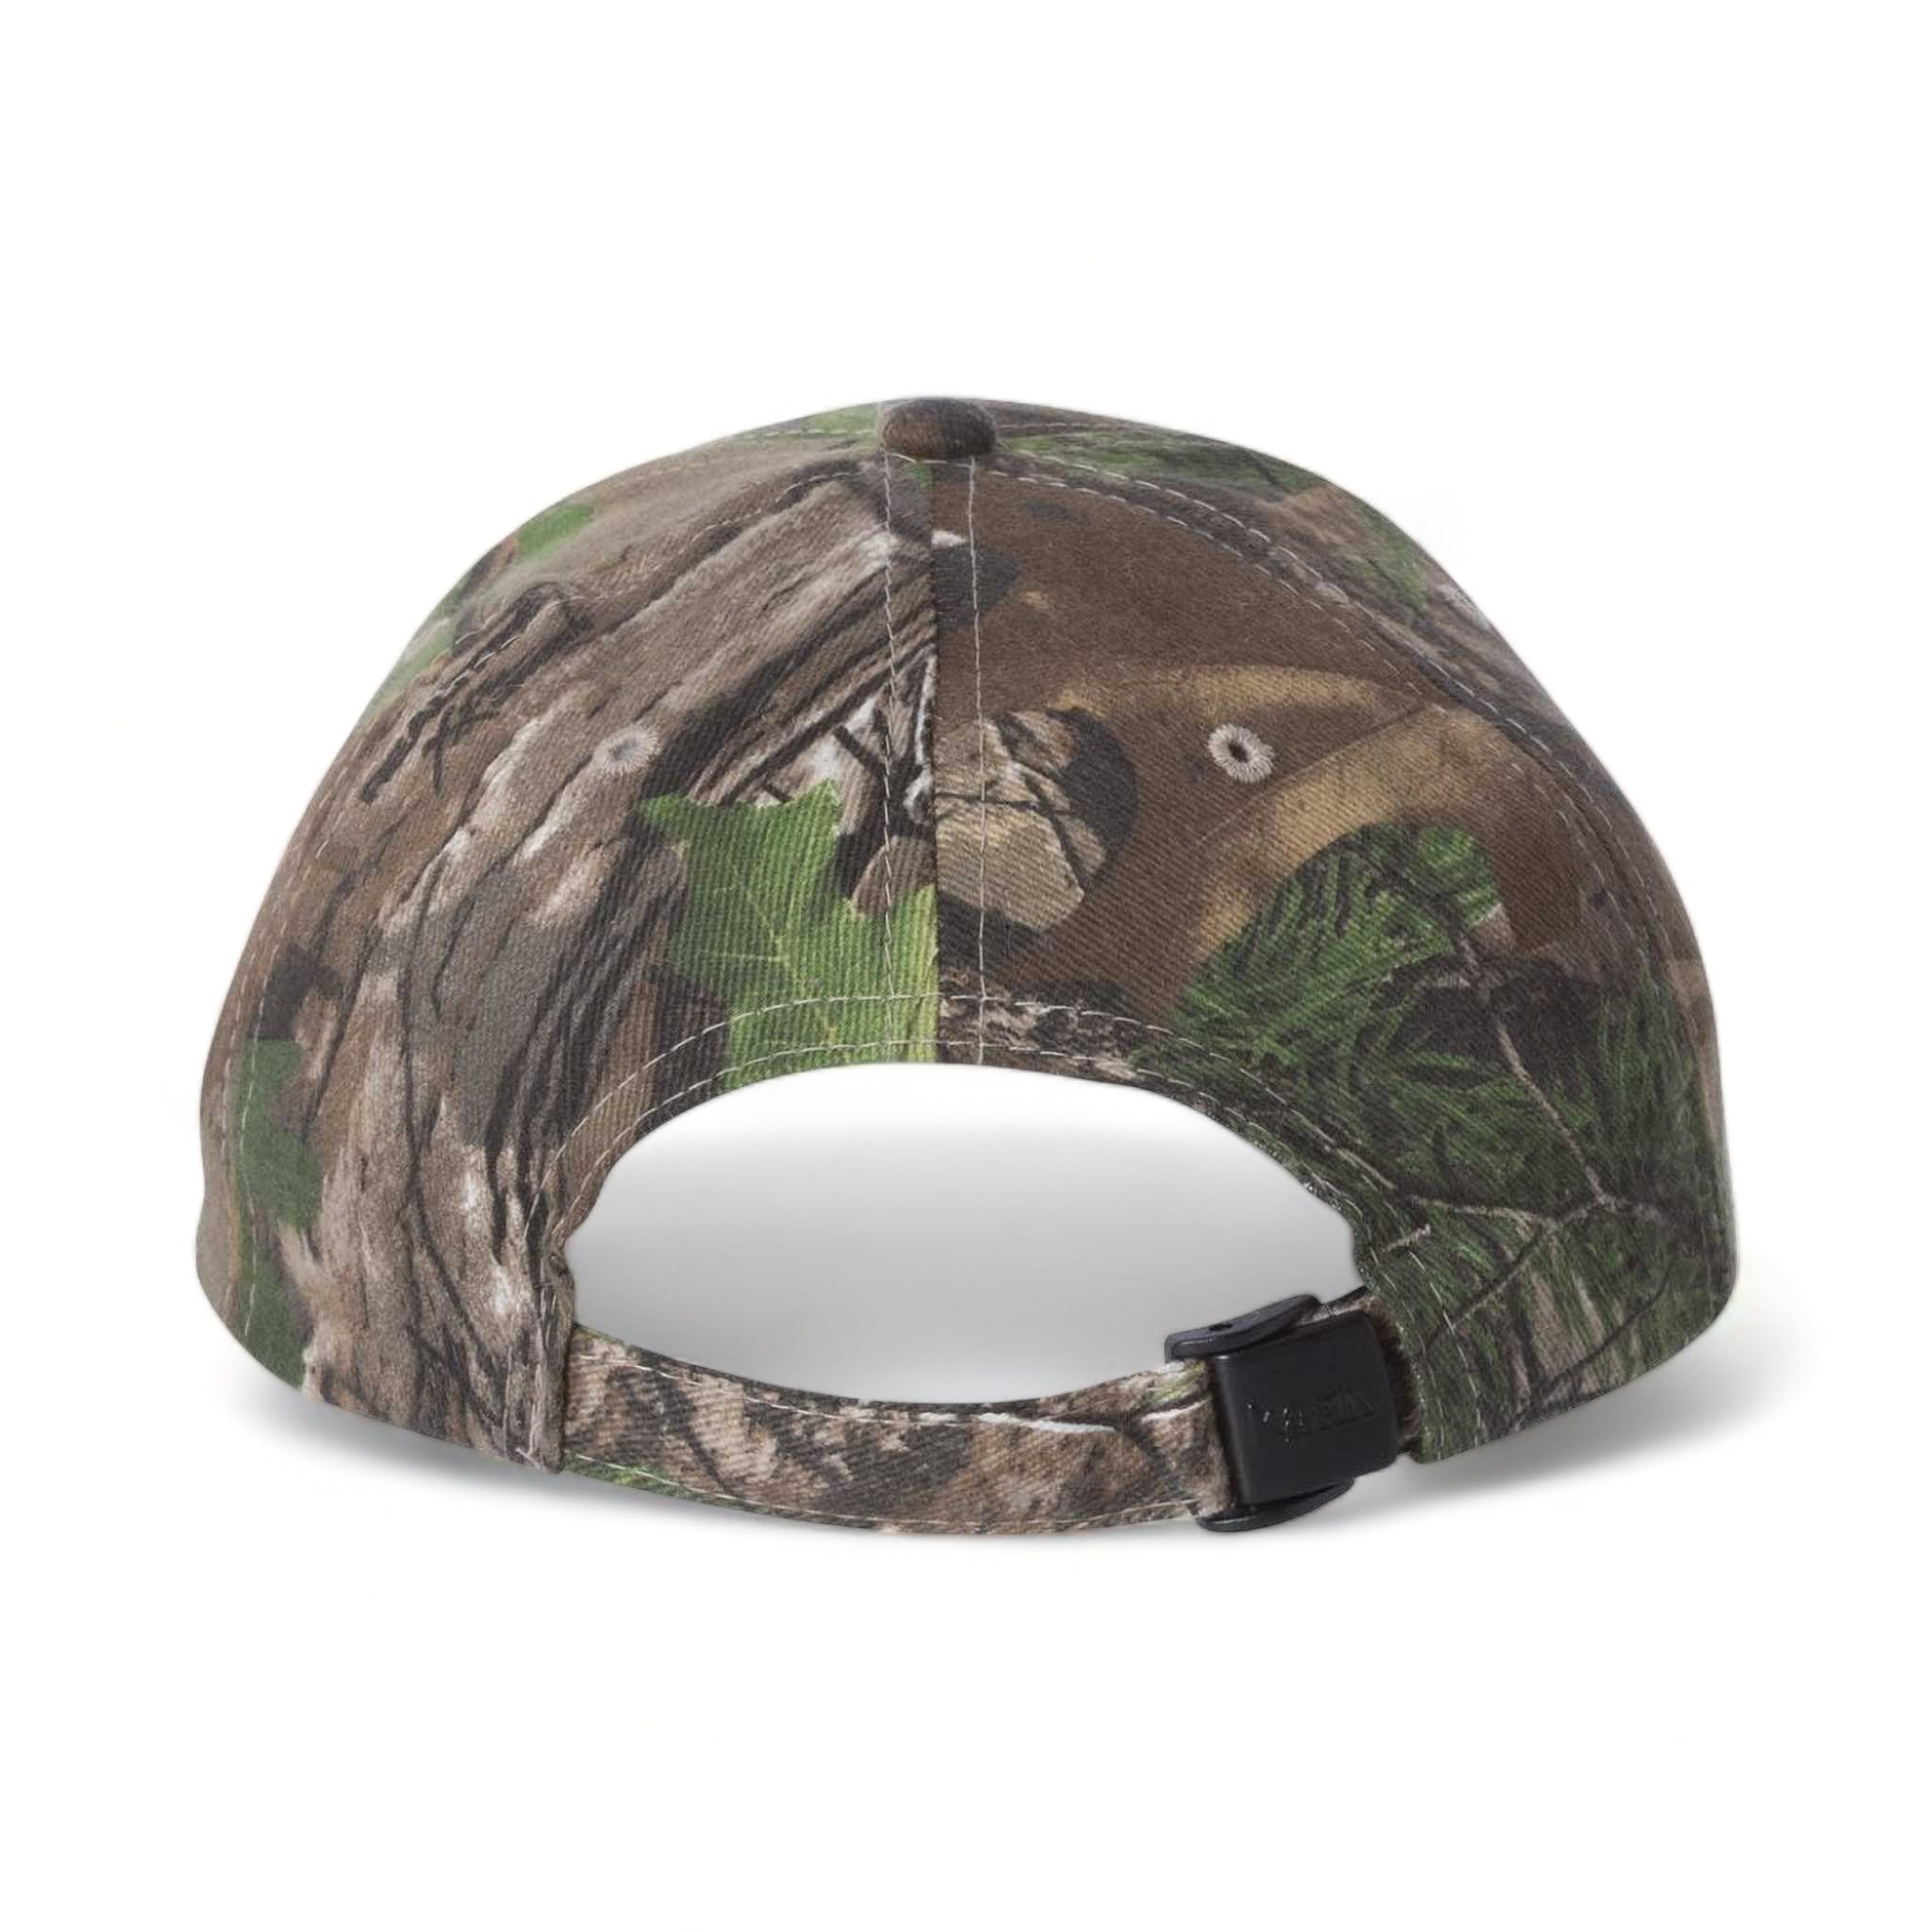 Back view of Kati LC10 custom hat in realtree xtra green